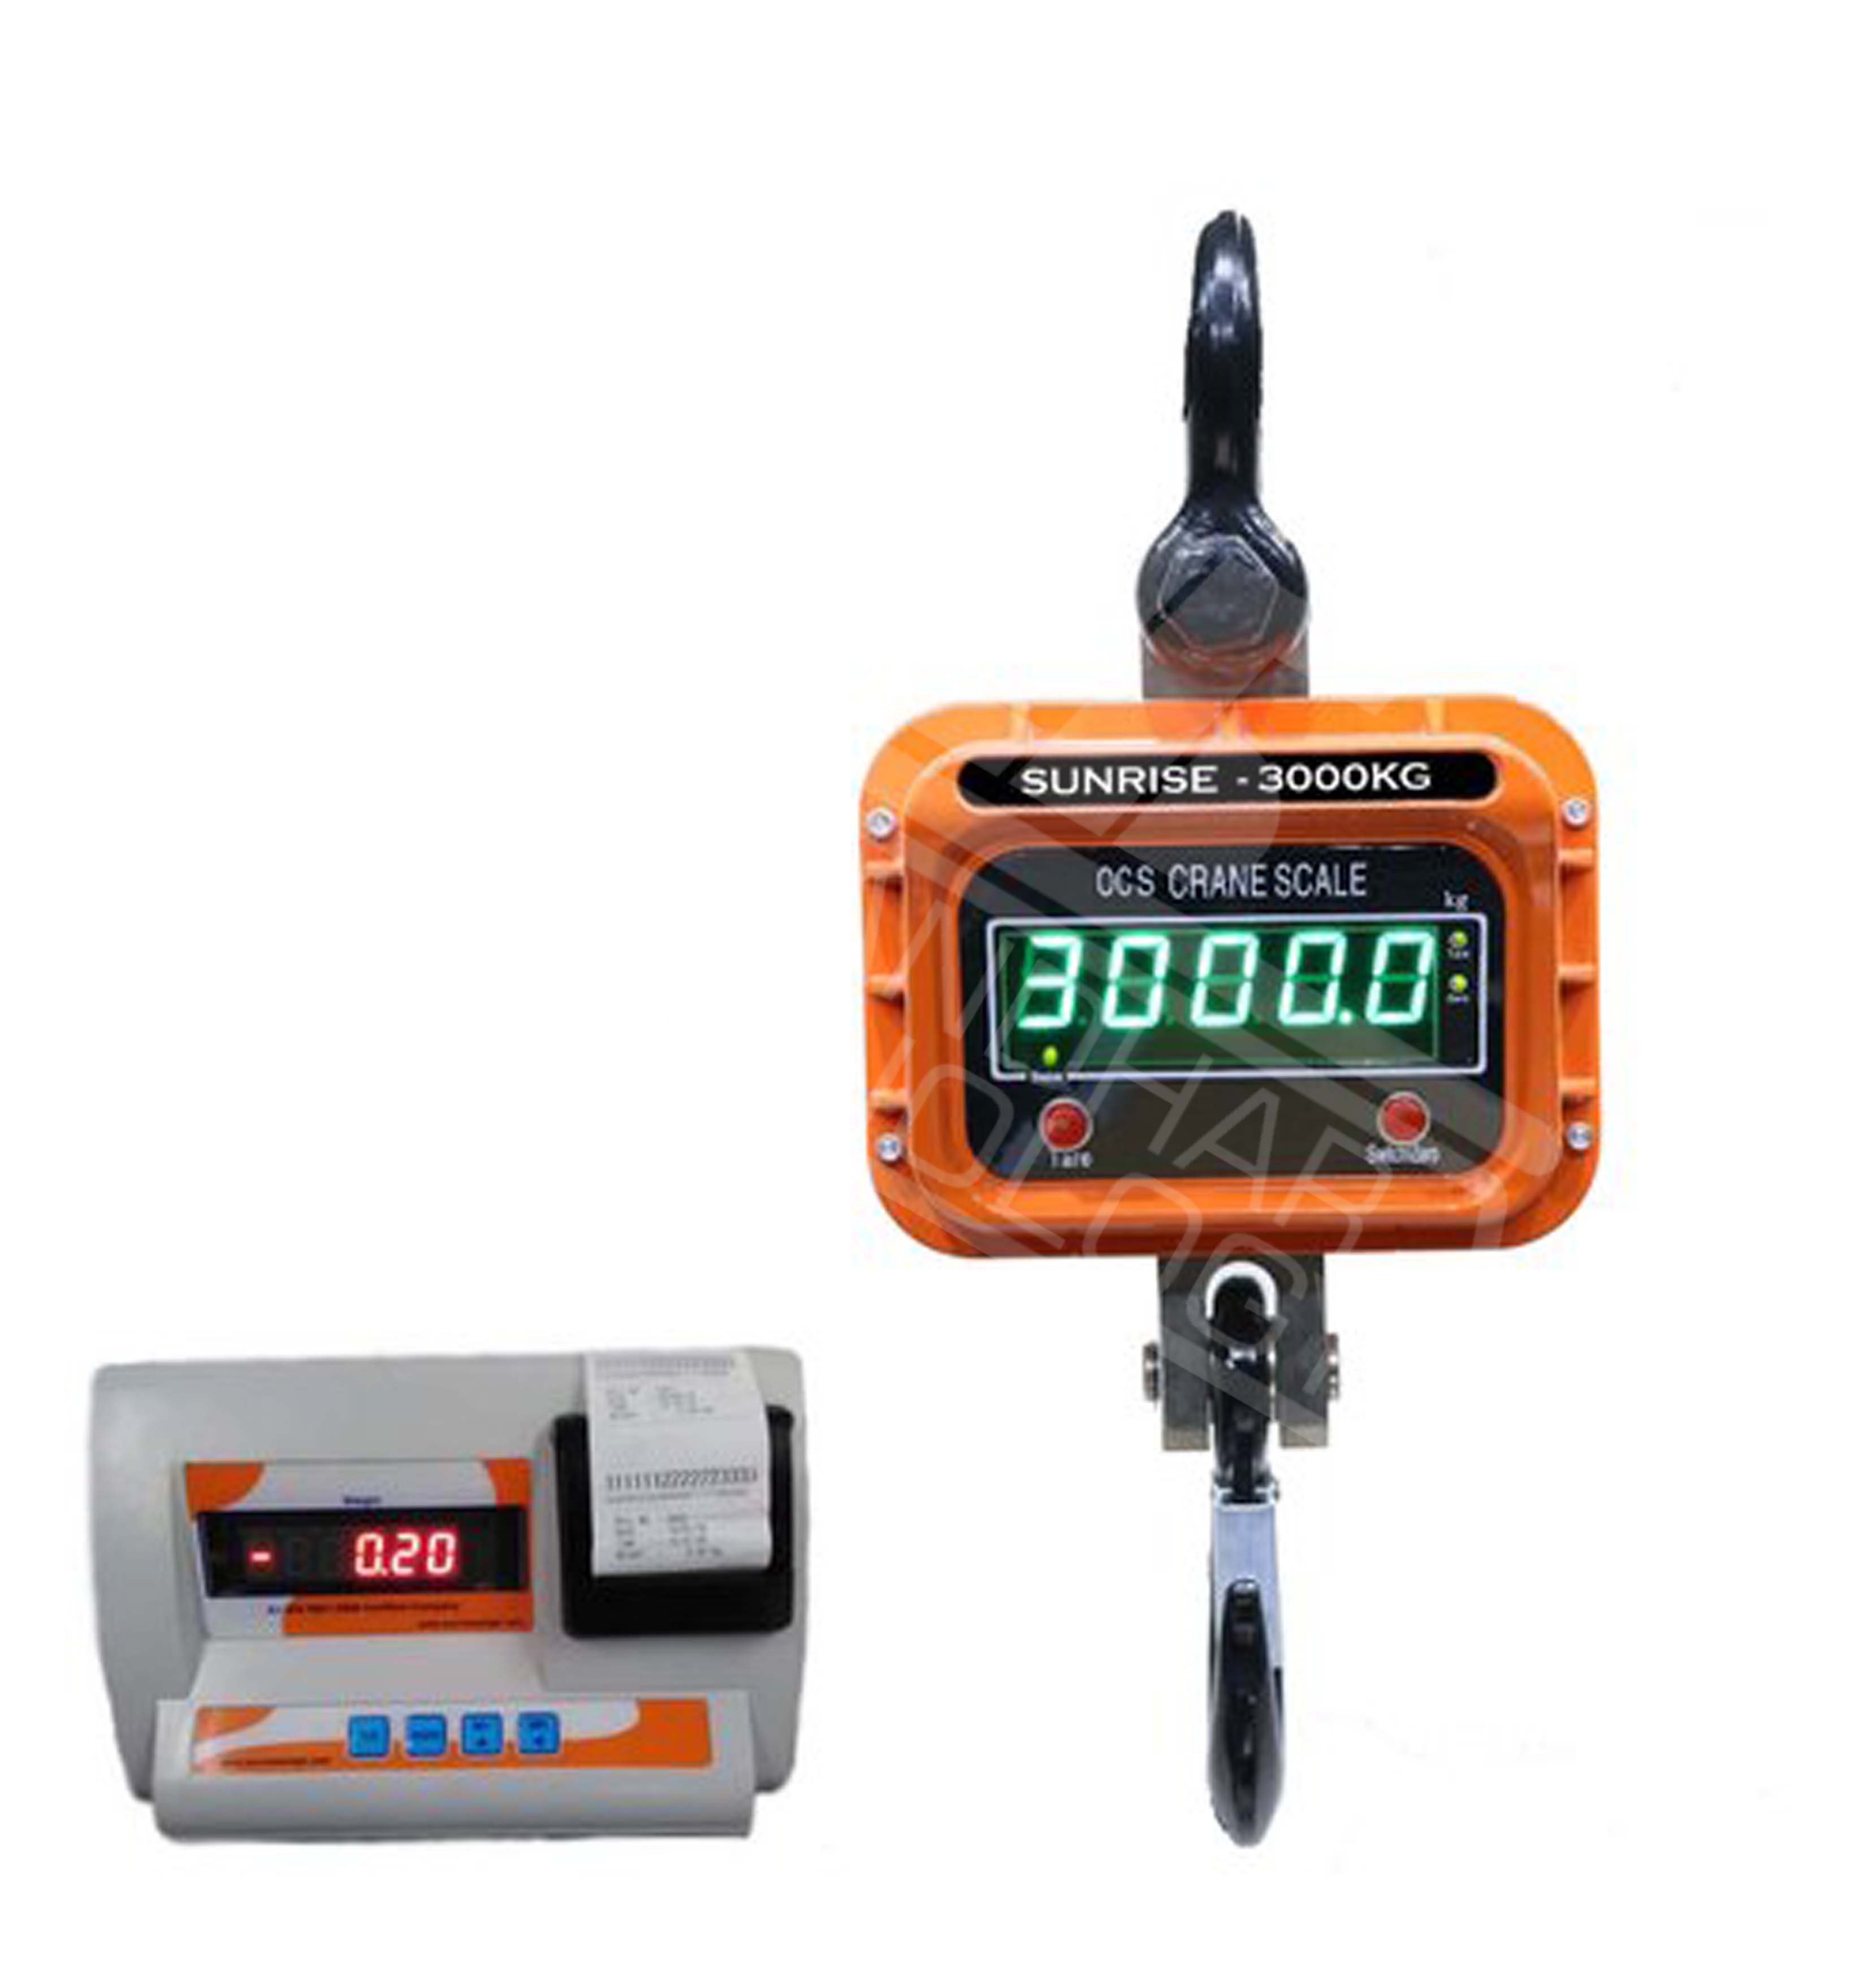 3 Ton Crane Scale With wireless Printer Indicator USB Pen Drive RS232